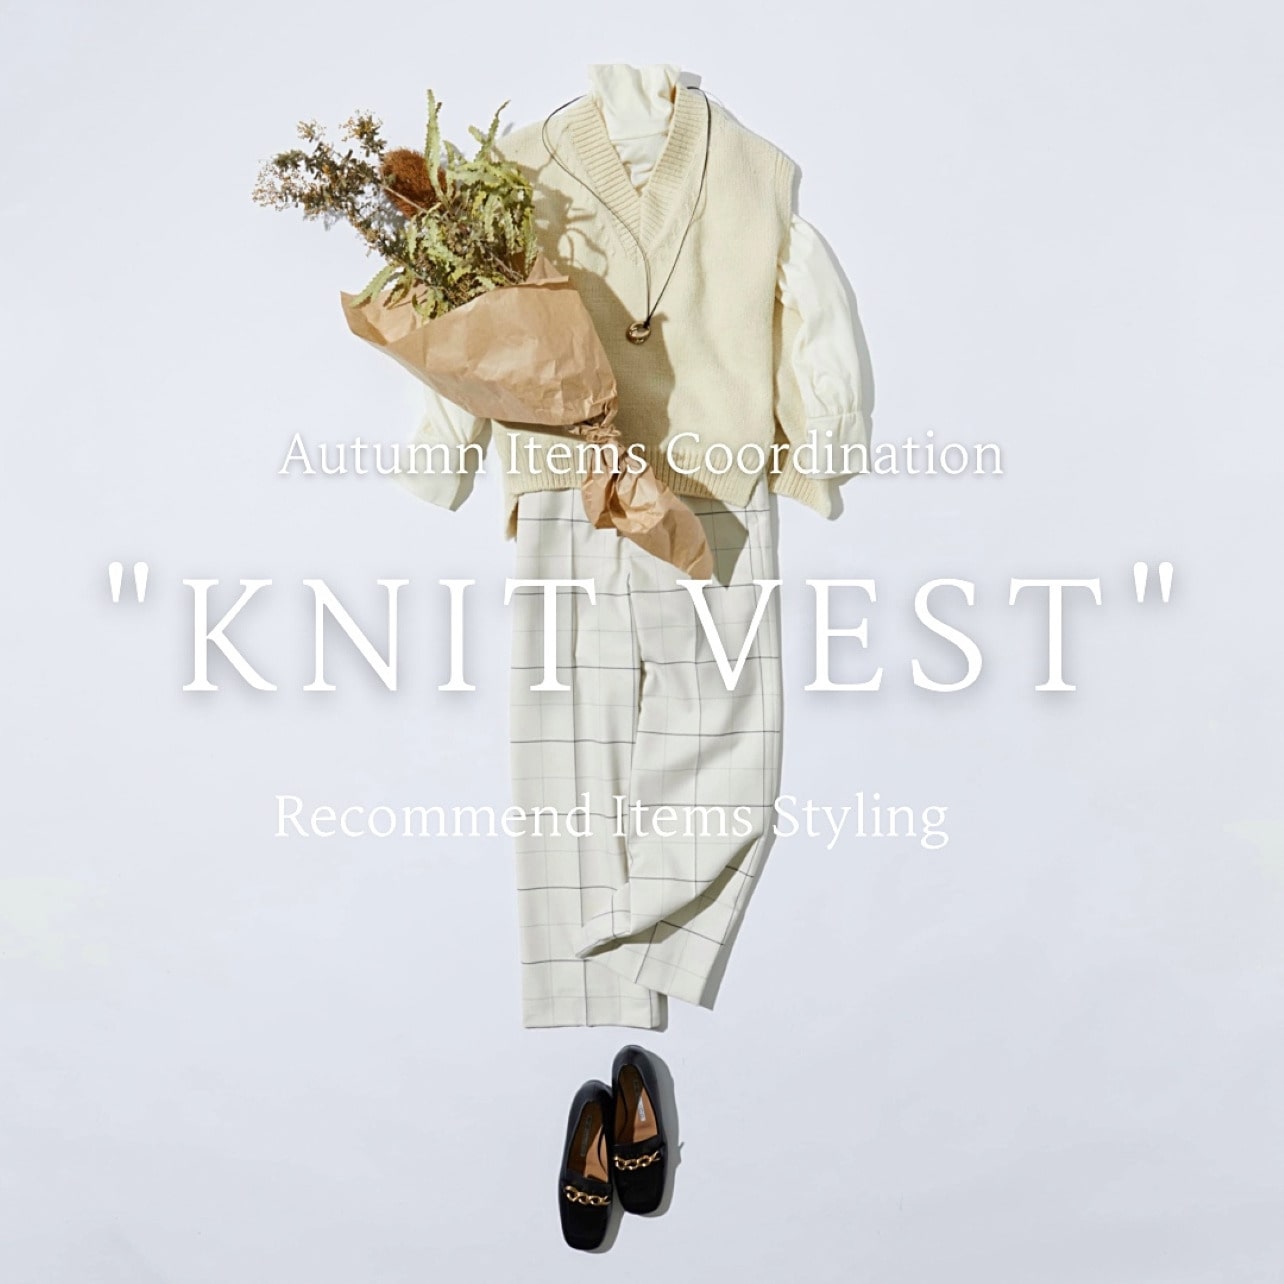 Recommend Items Styling "Knit Vest"